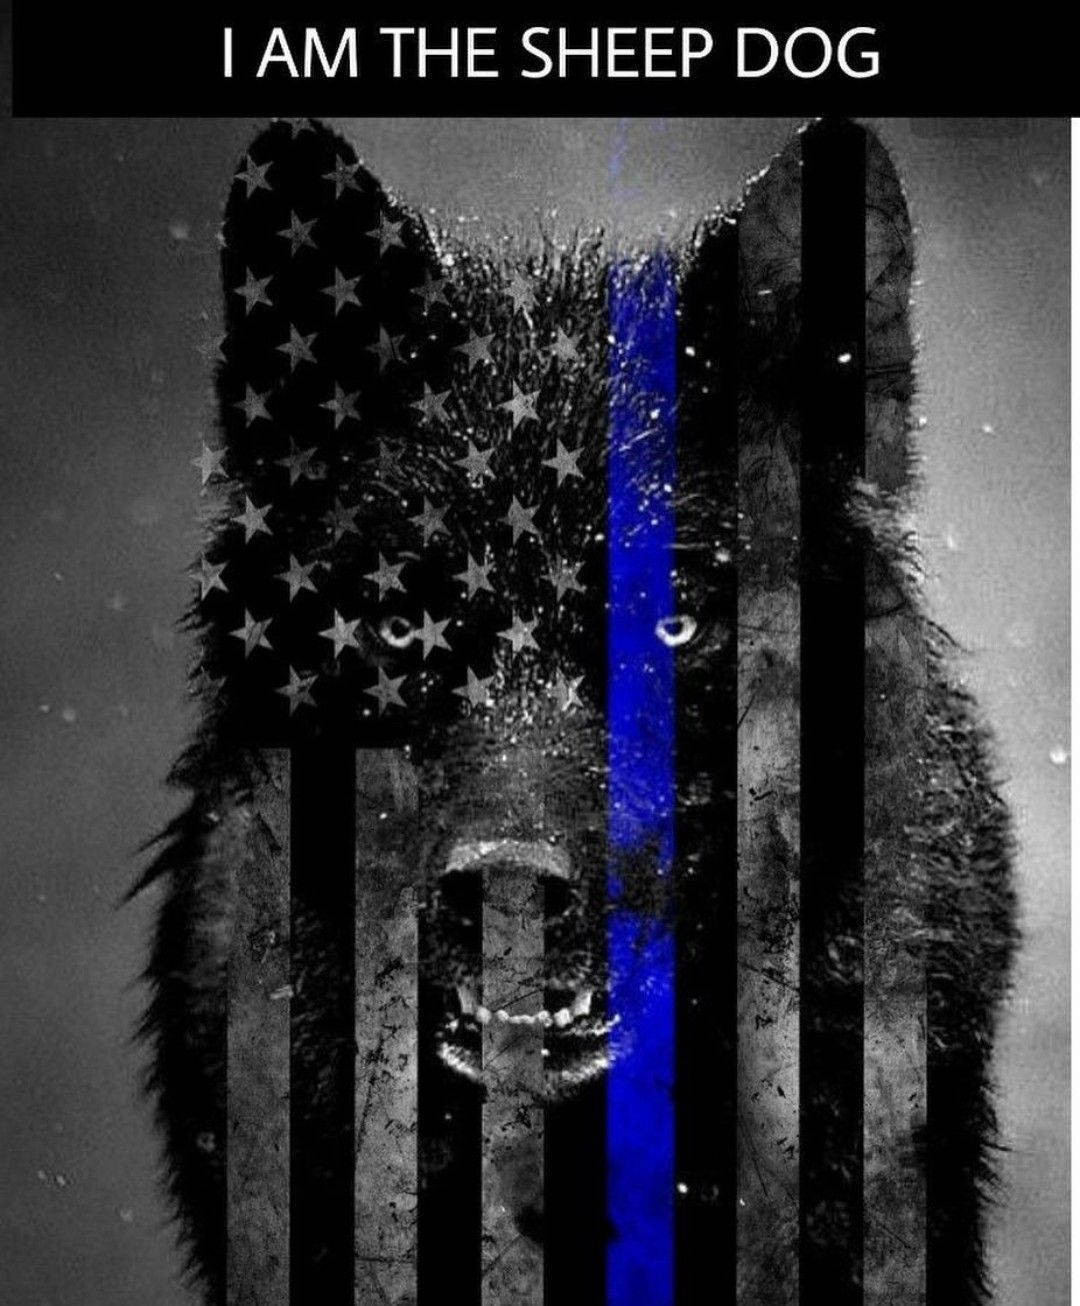 "A Working Sacrifice For The Thin Blue Line" Wallpaper